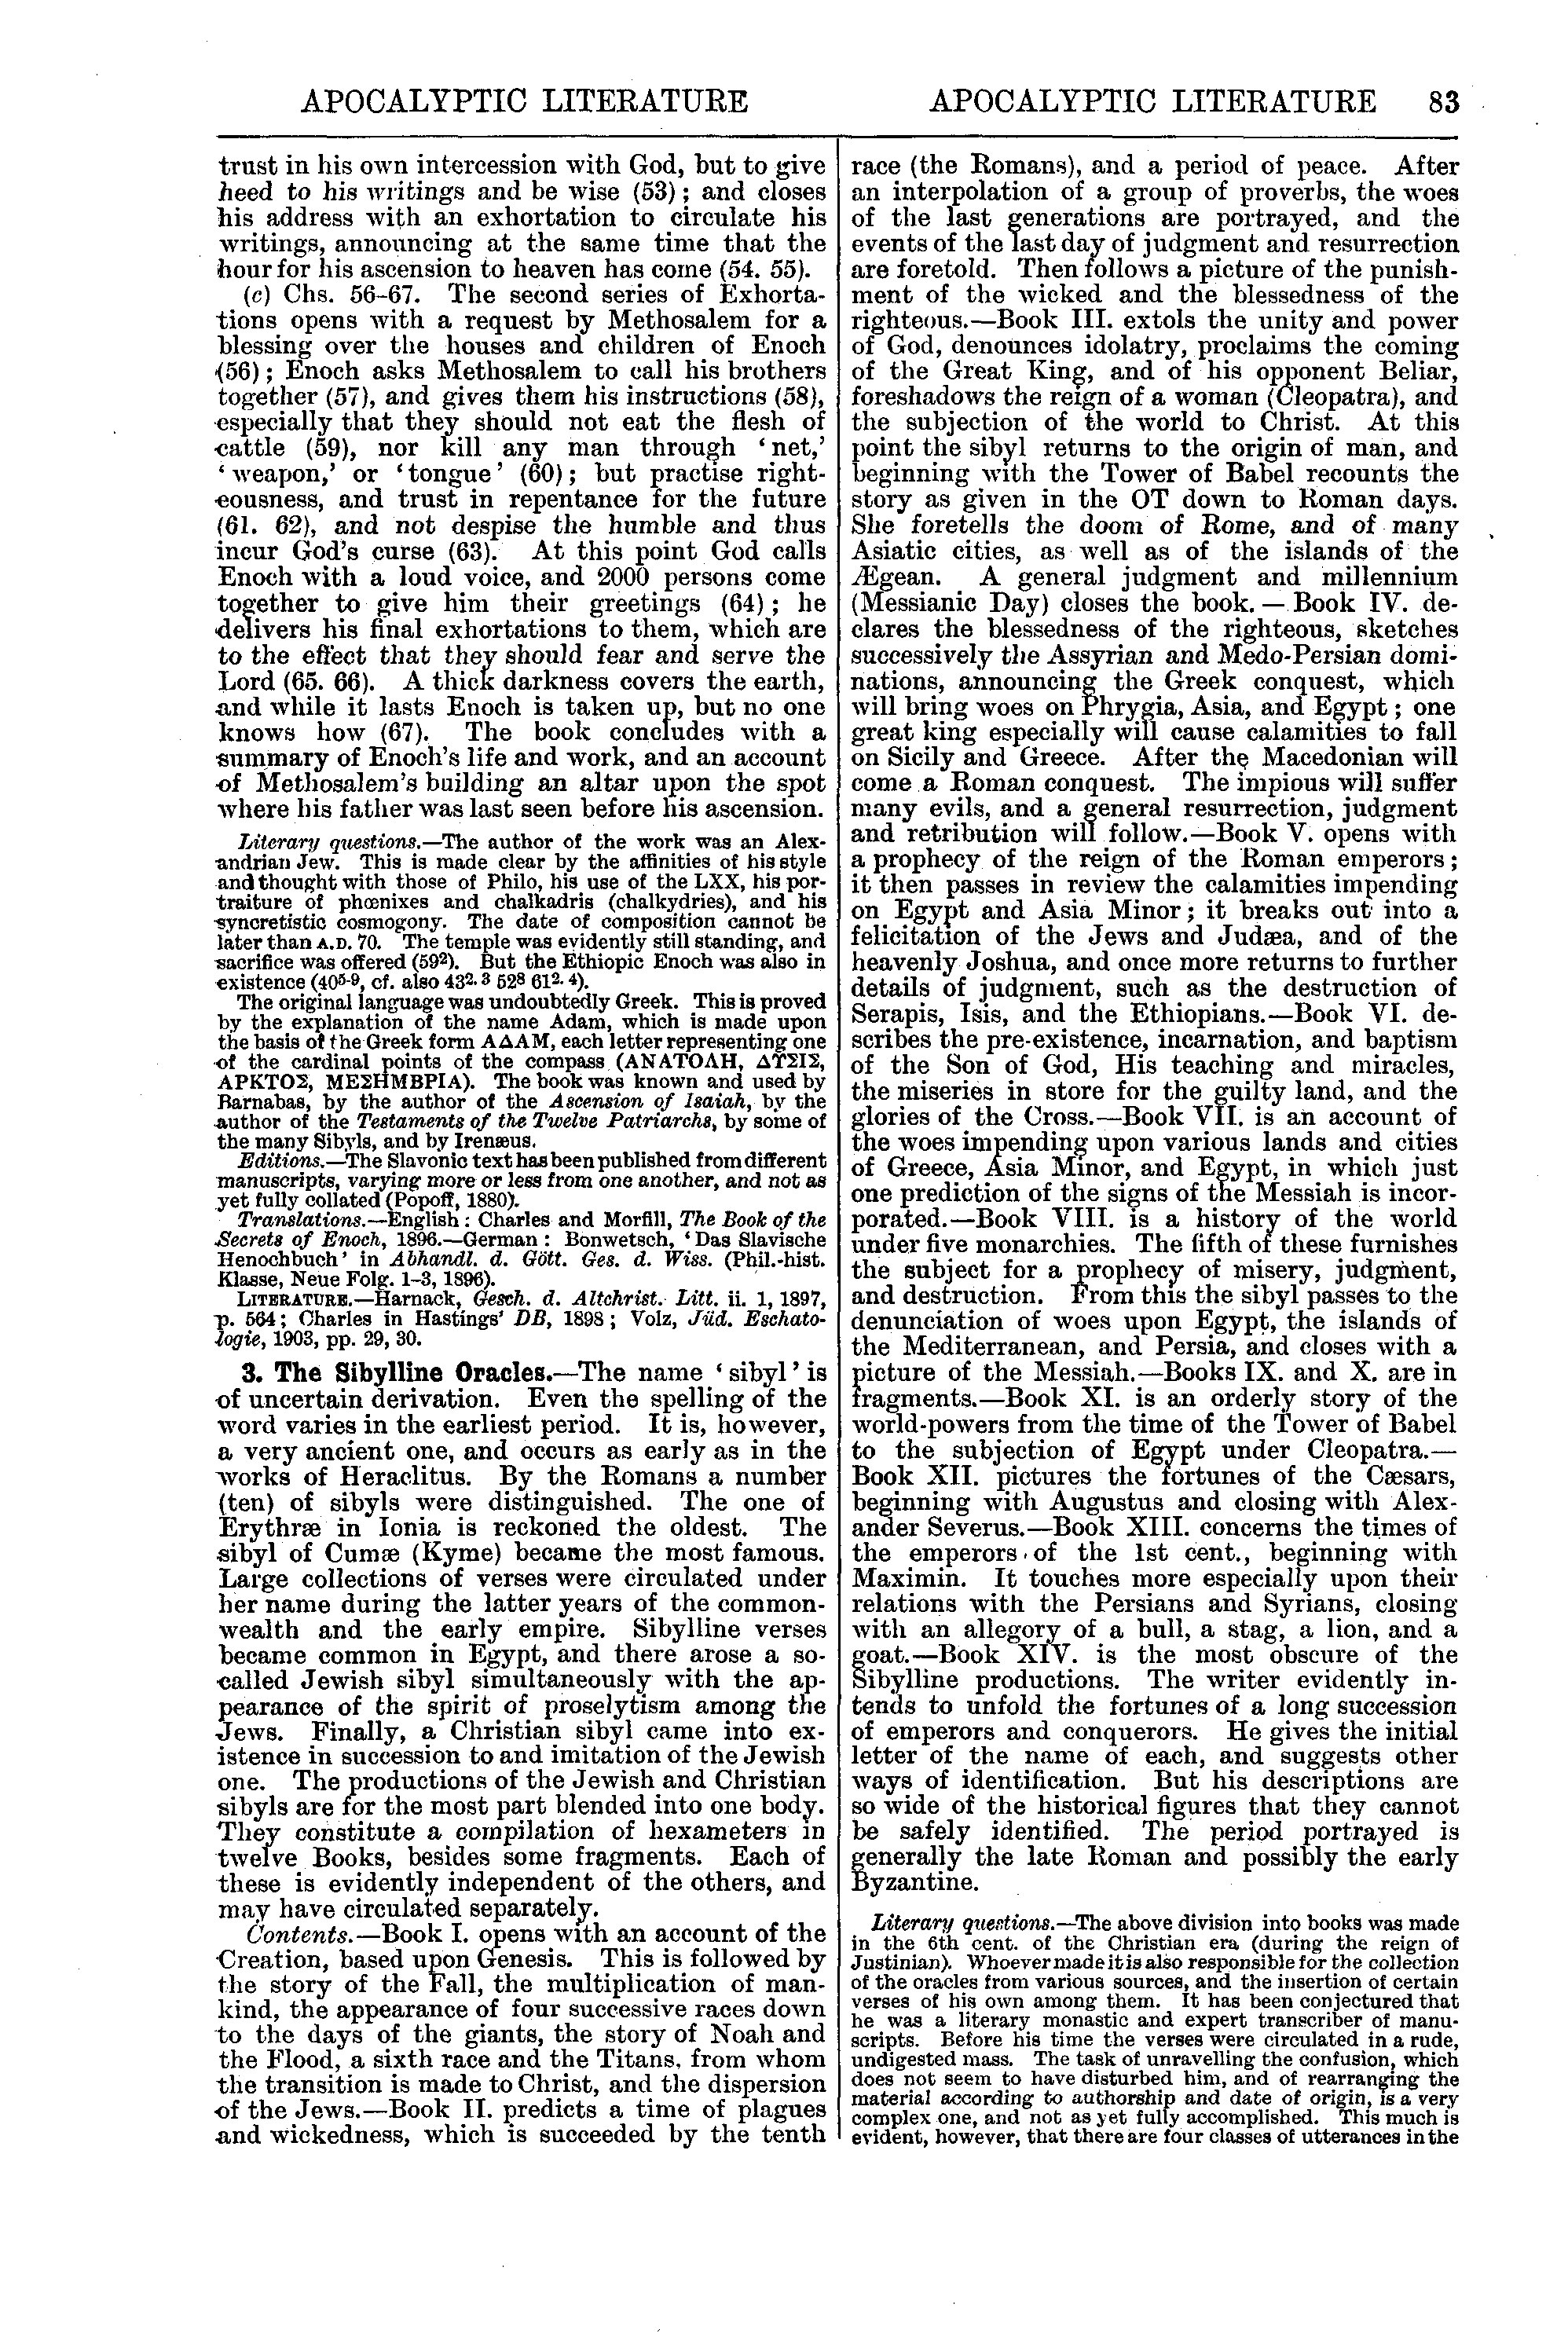 Image of page 83